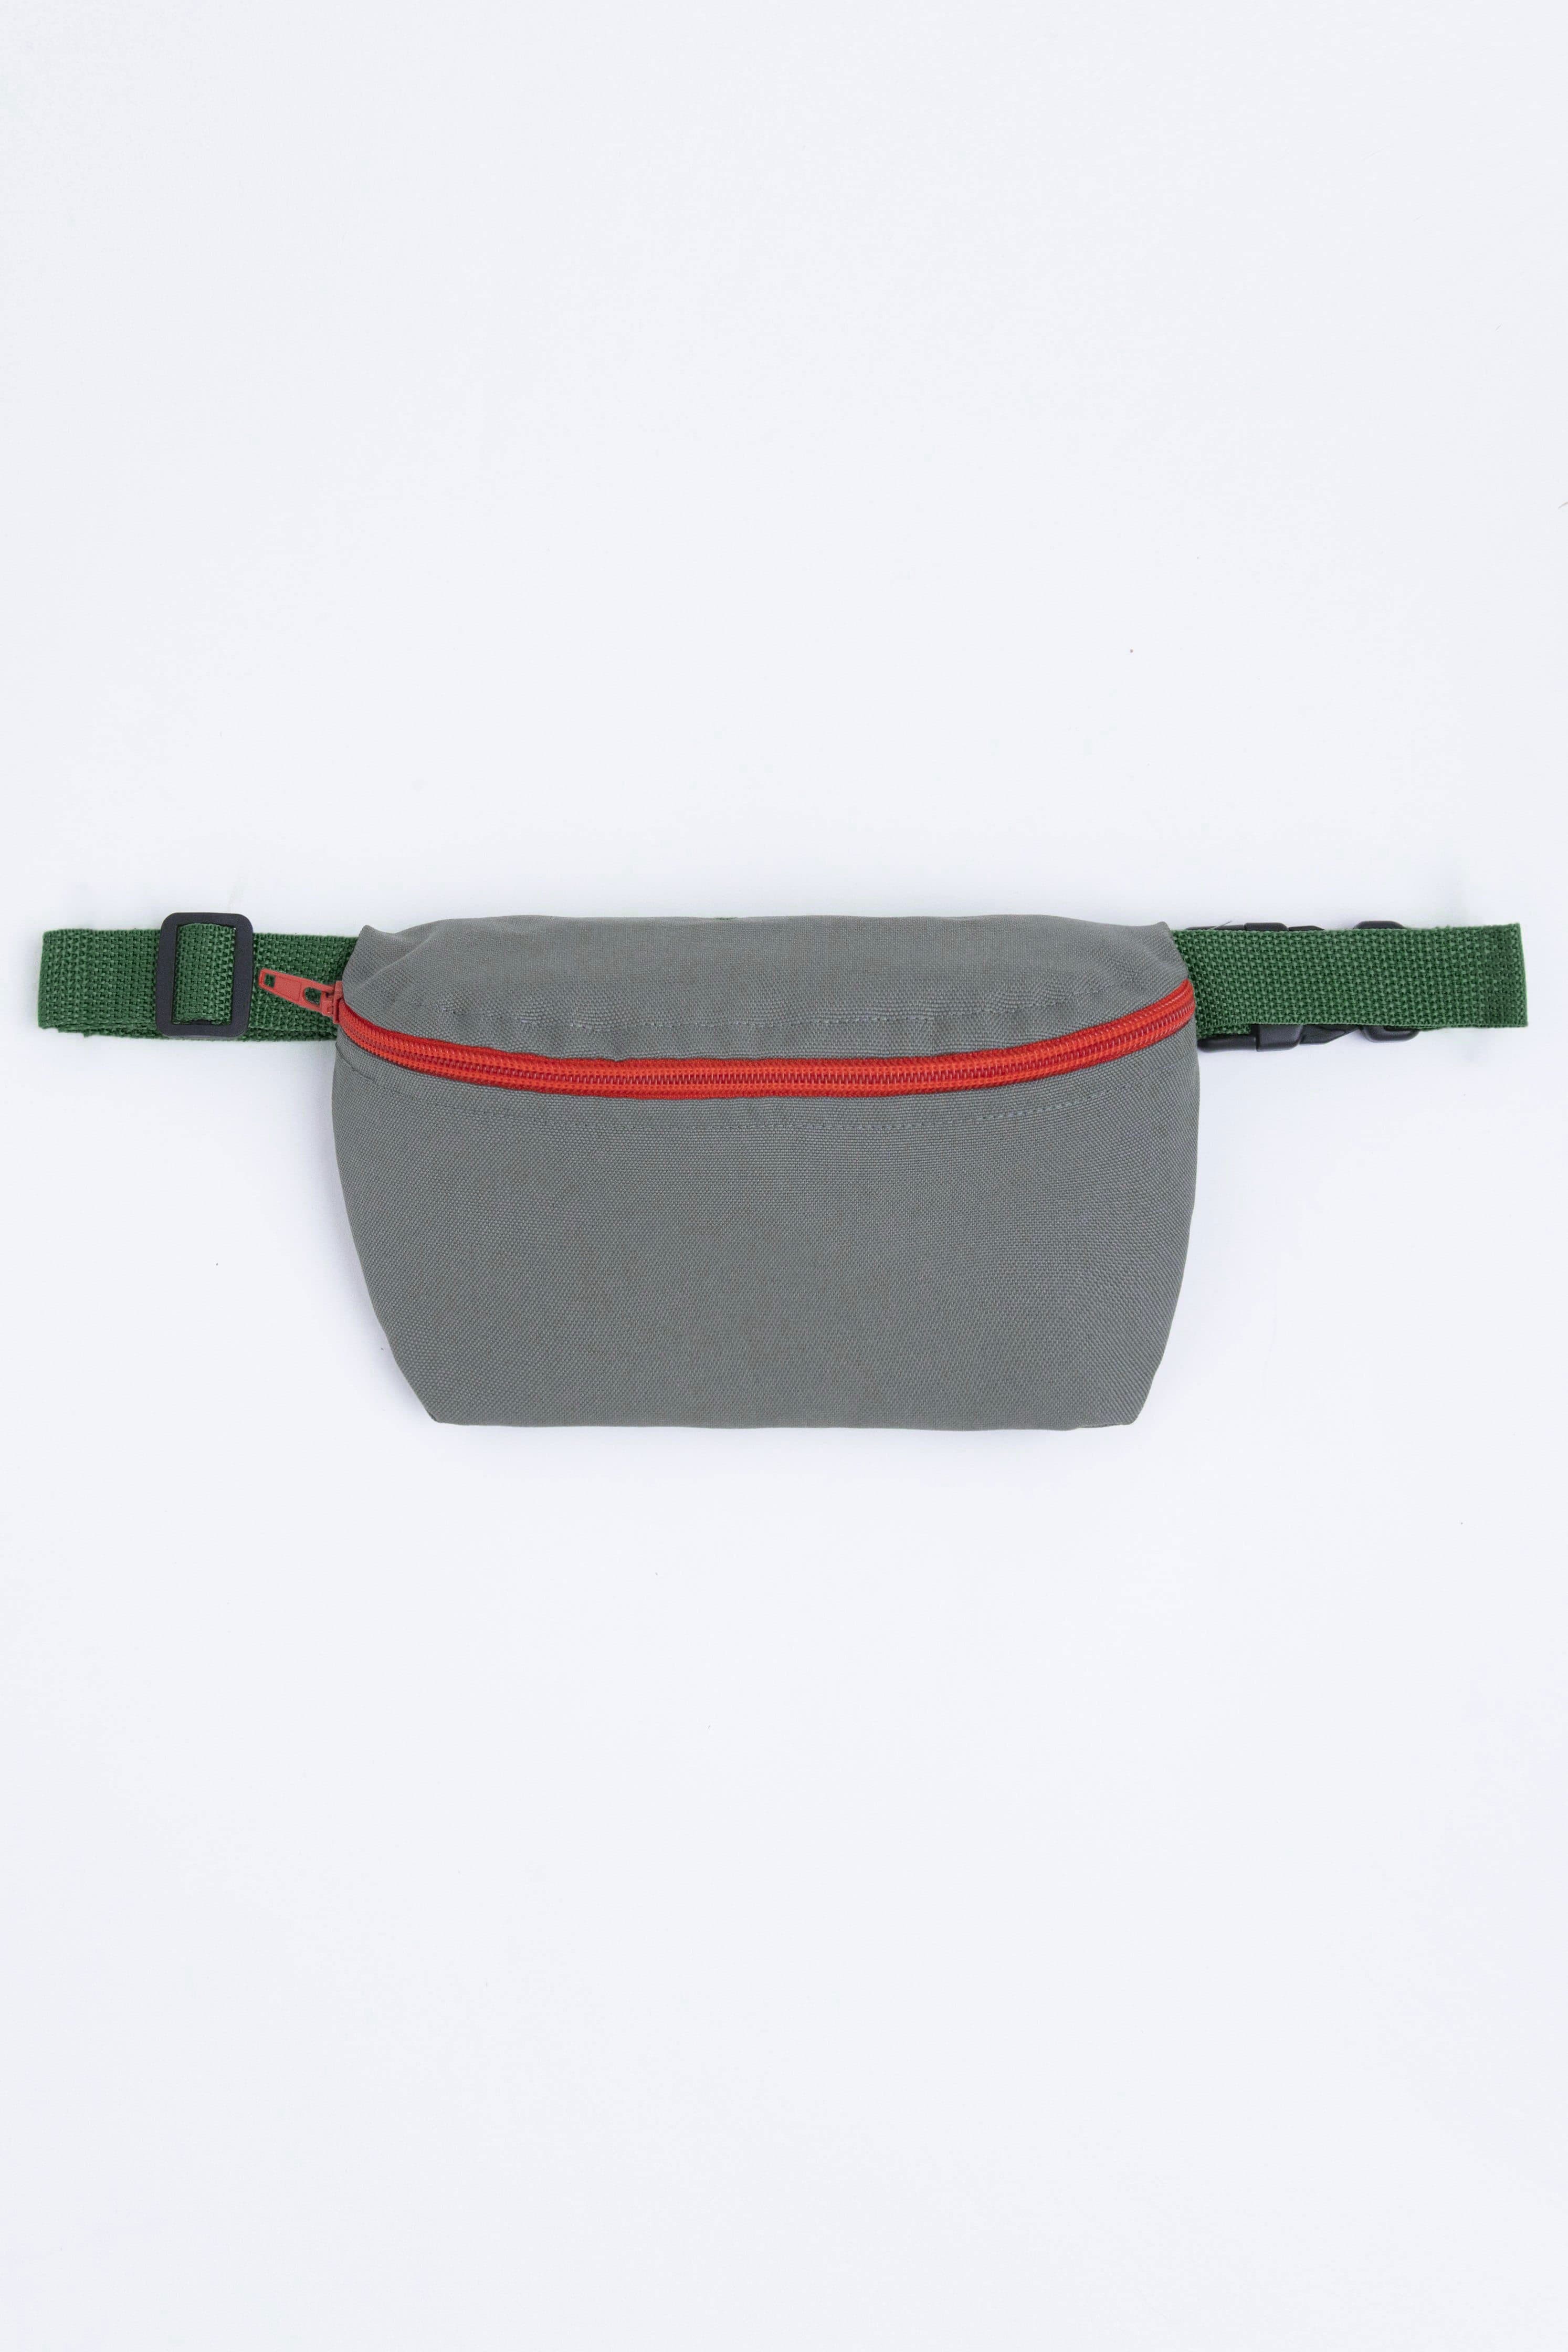 BUMBAG LV Fanny Pack – Rags 2 Riches Apparel